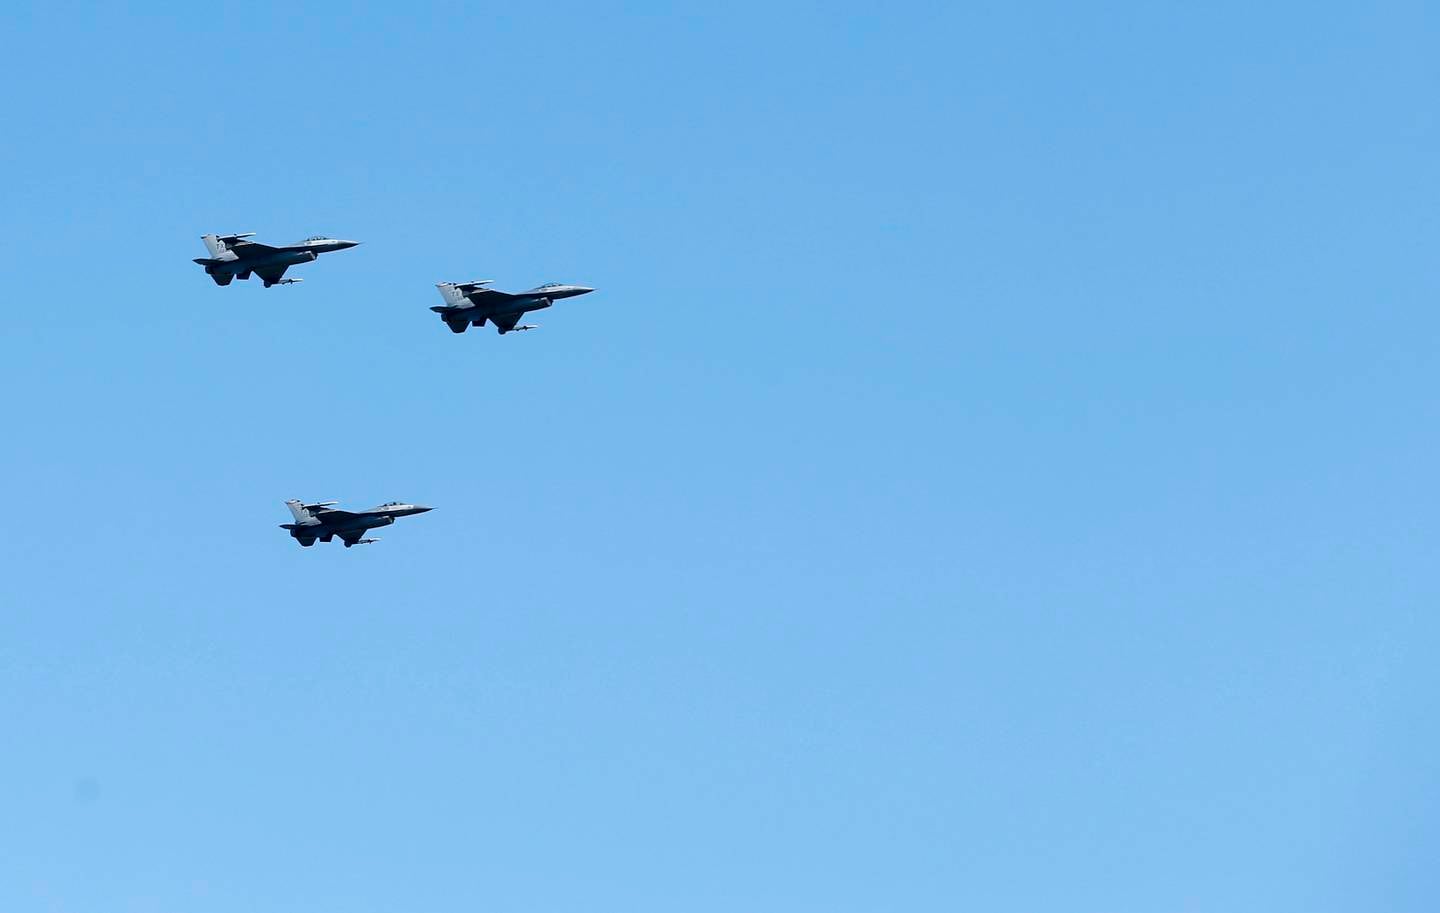 In honor of Ross Perot's commitment to the military and veterans, F-16 fighter jets fly during his gravesite service in a missing man formation over Sparkman-Hillcrest Memorial Park Cemetery in Dallas on Tuesday, July 16, 2019.